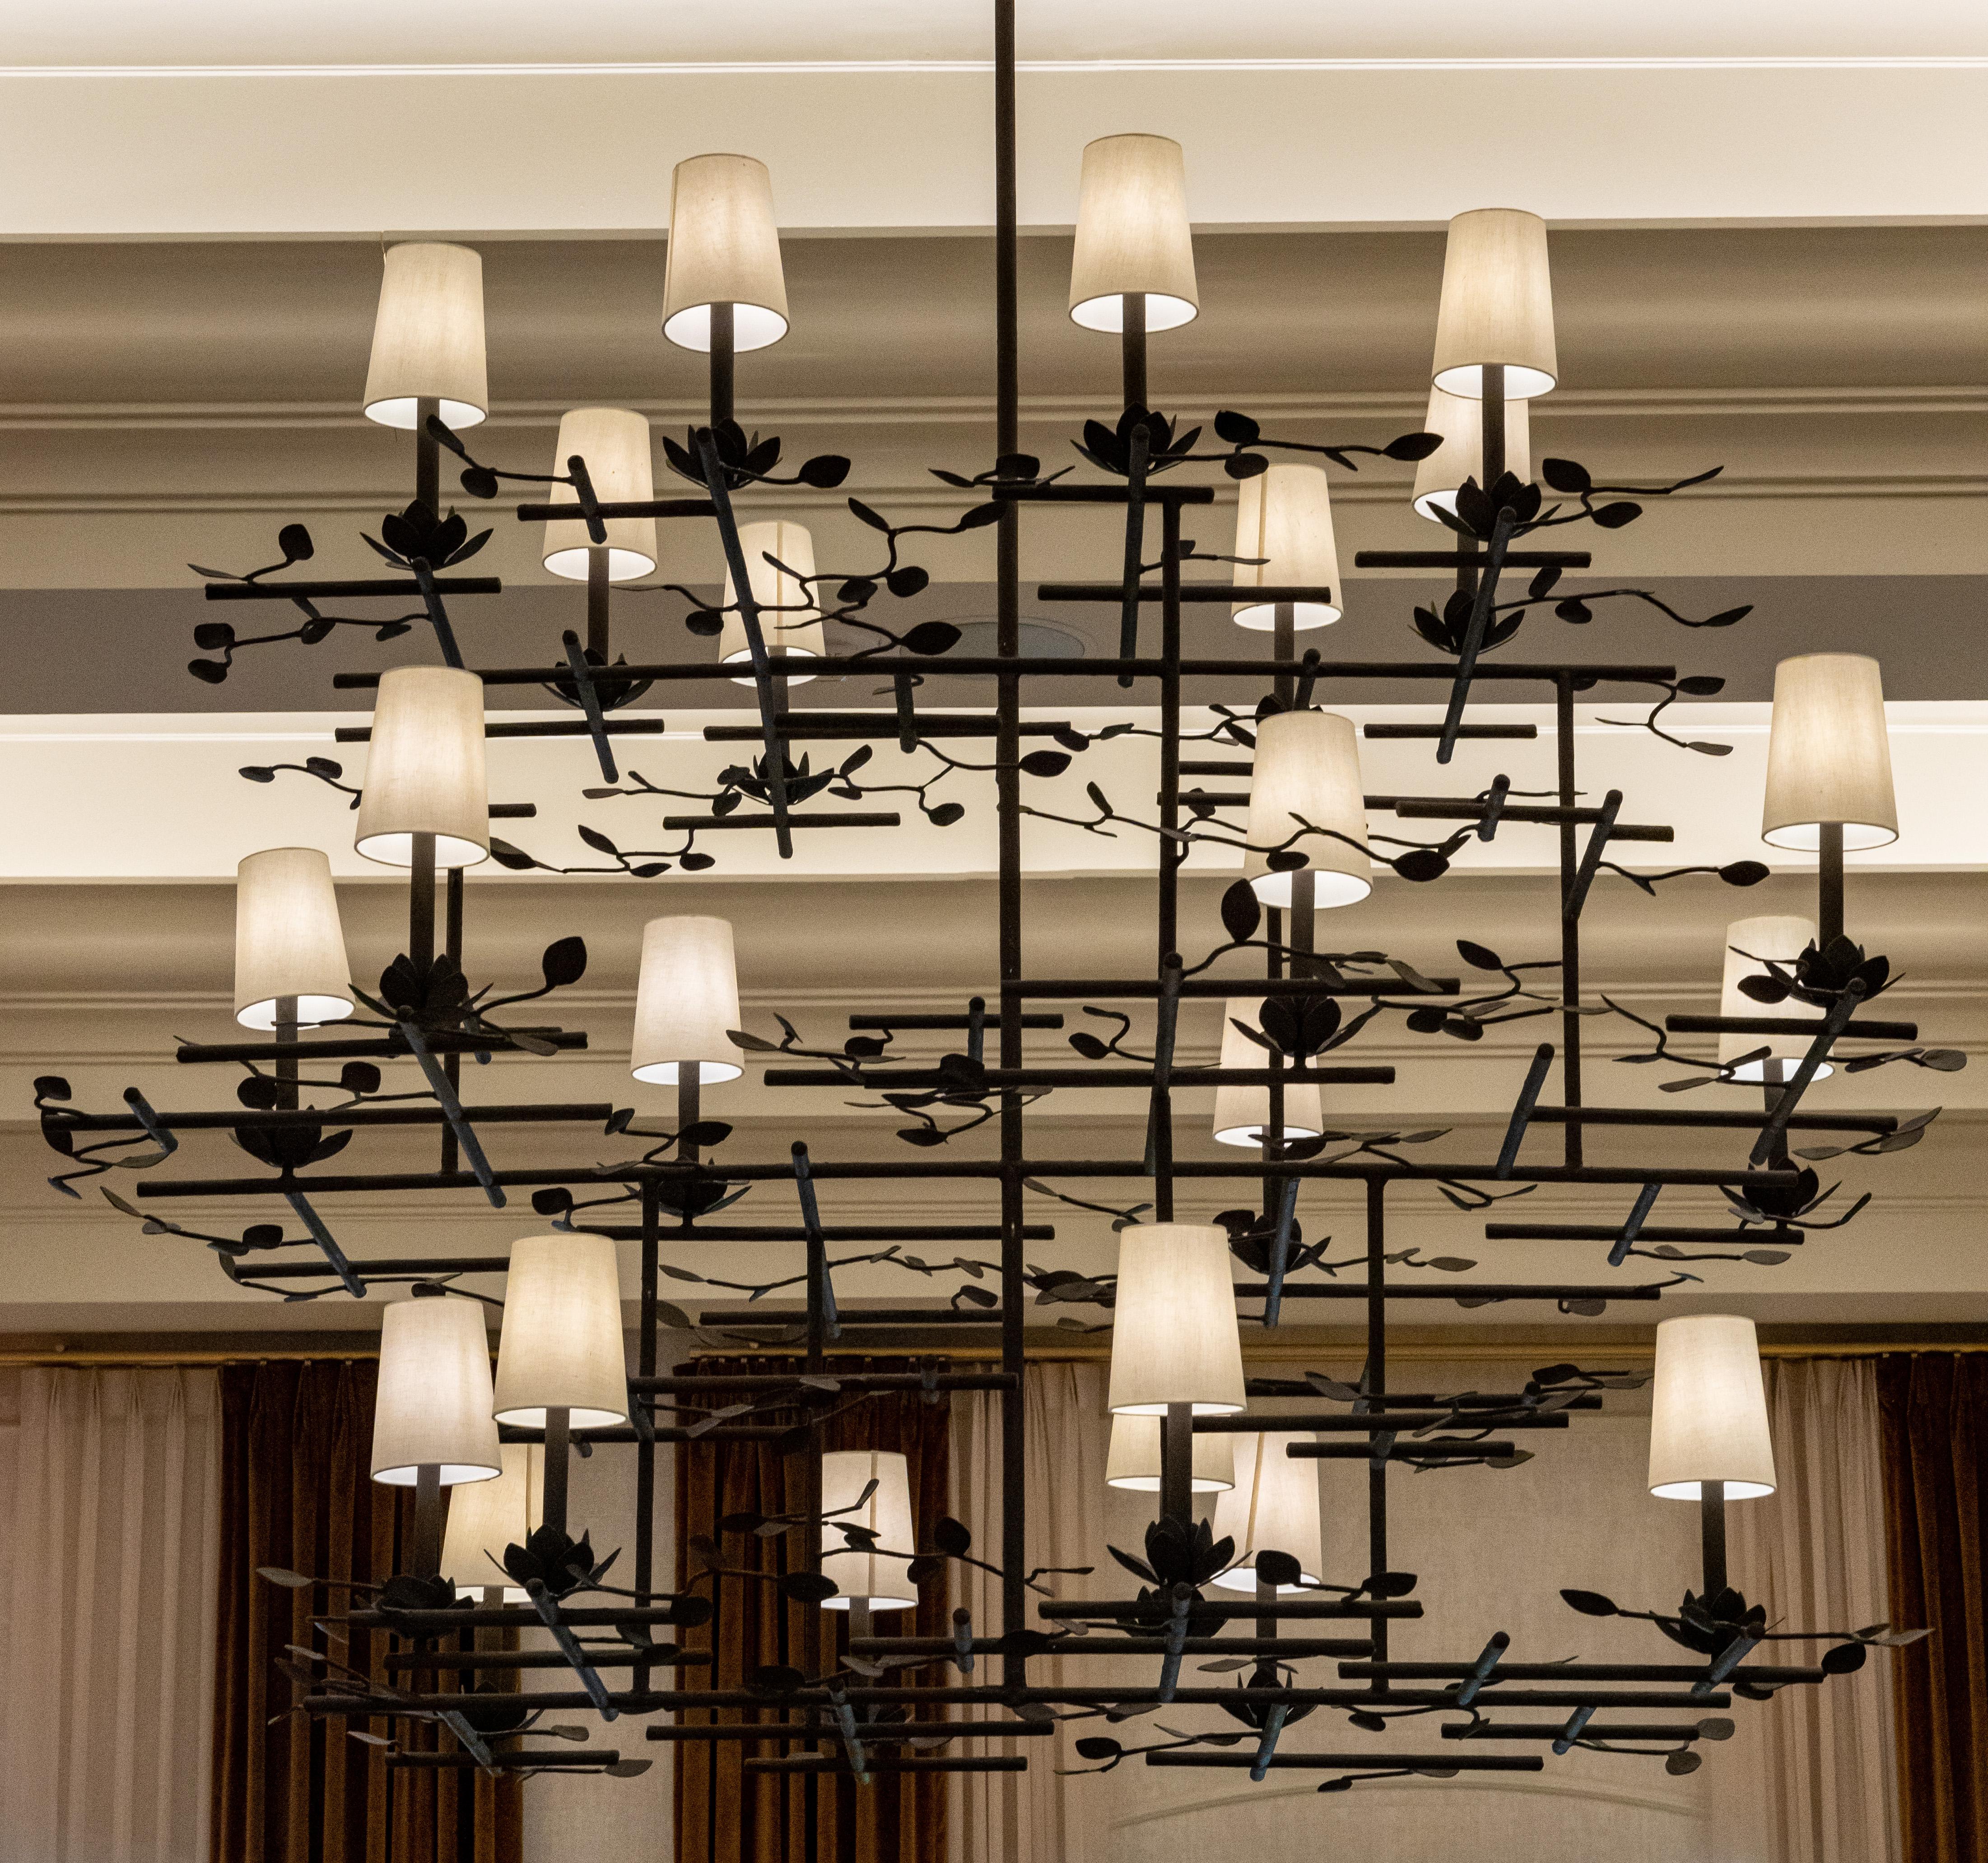 Stunning bronzed finished Lotus chandelier with light shades by Tracey Garet of Apsara Interior. The chandelier has multiple tiers and 24 lights. Each light rises out of a lotus flower and is surrounded by leaves and branches. These chandeliers are